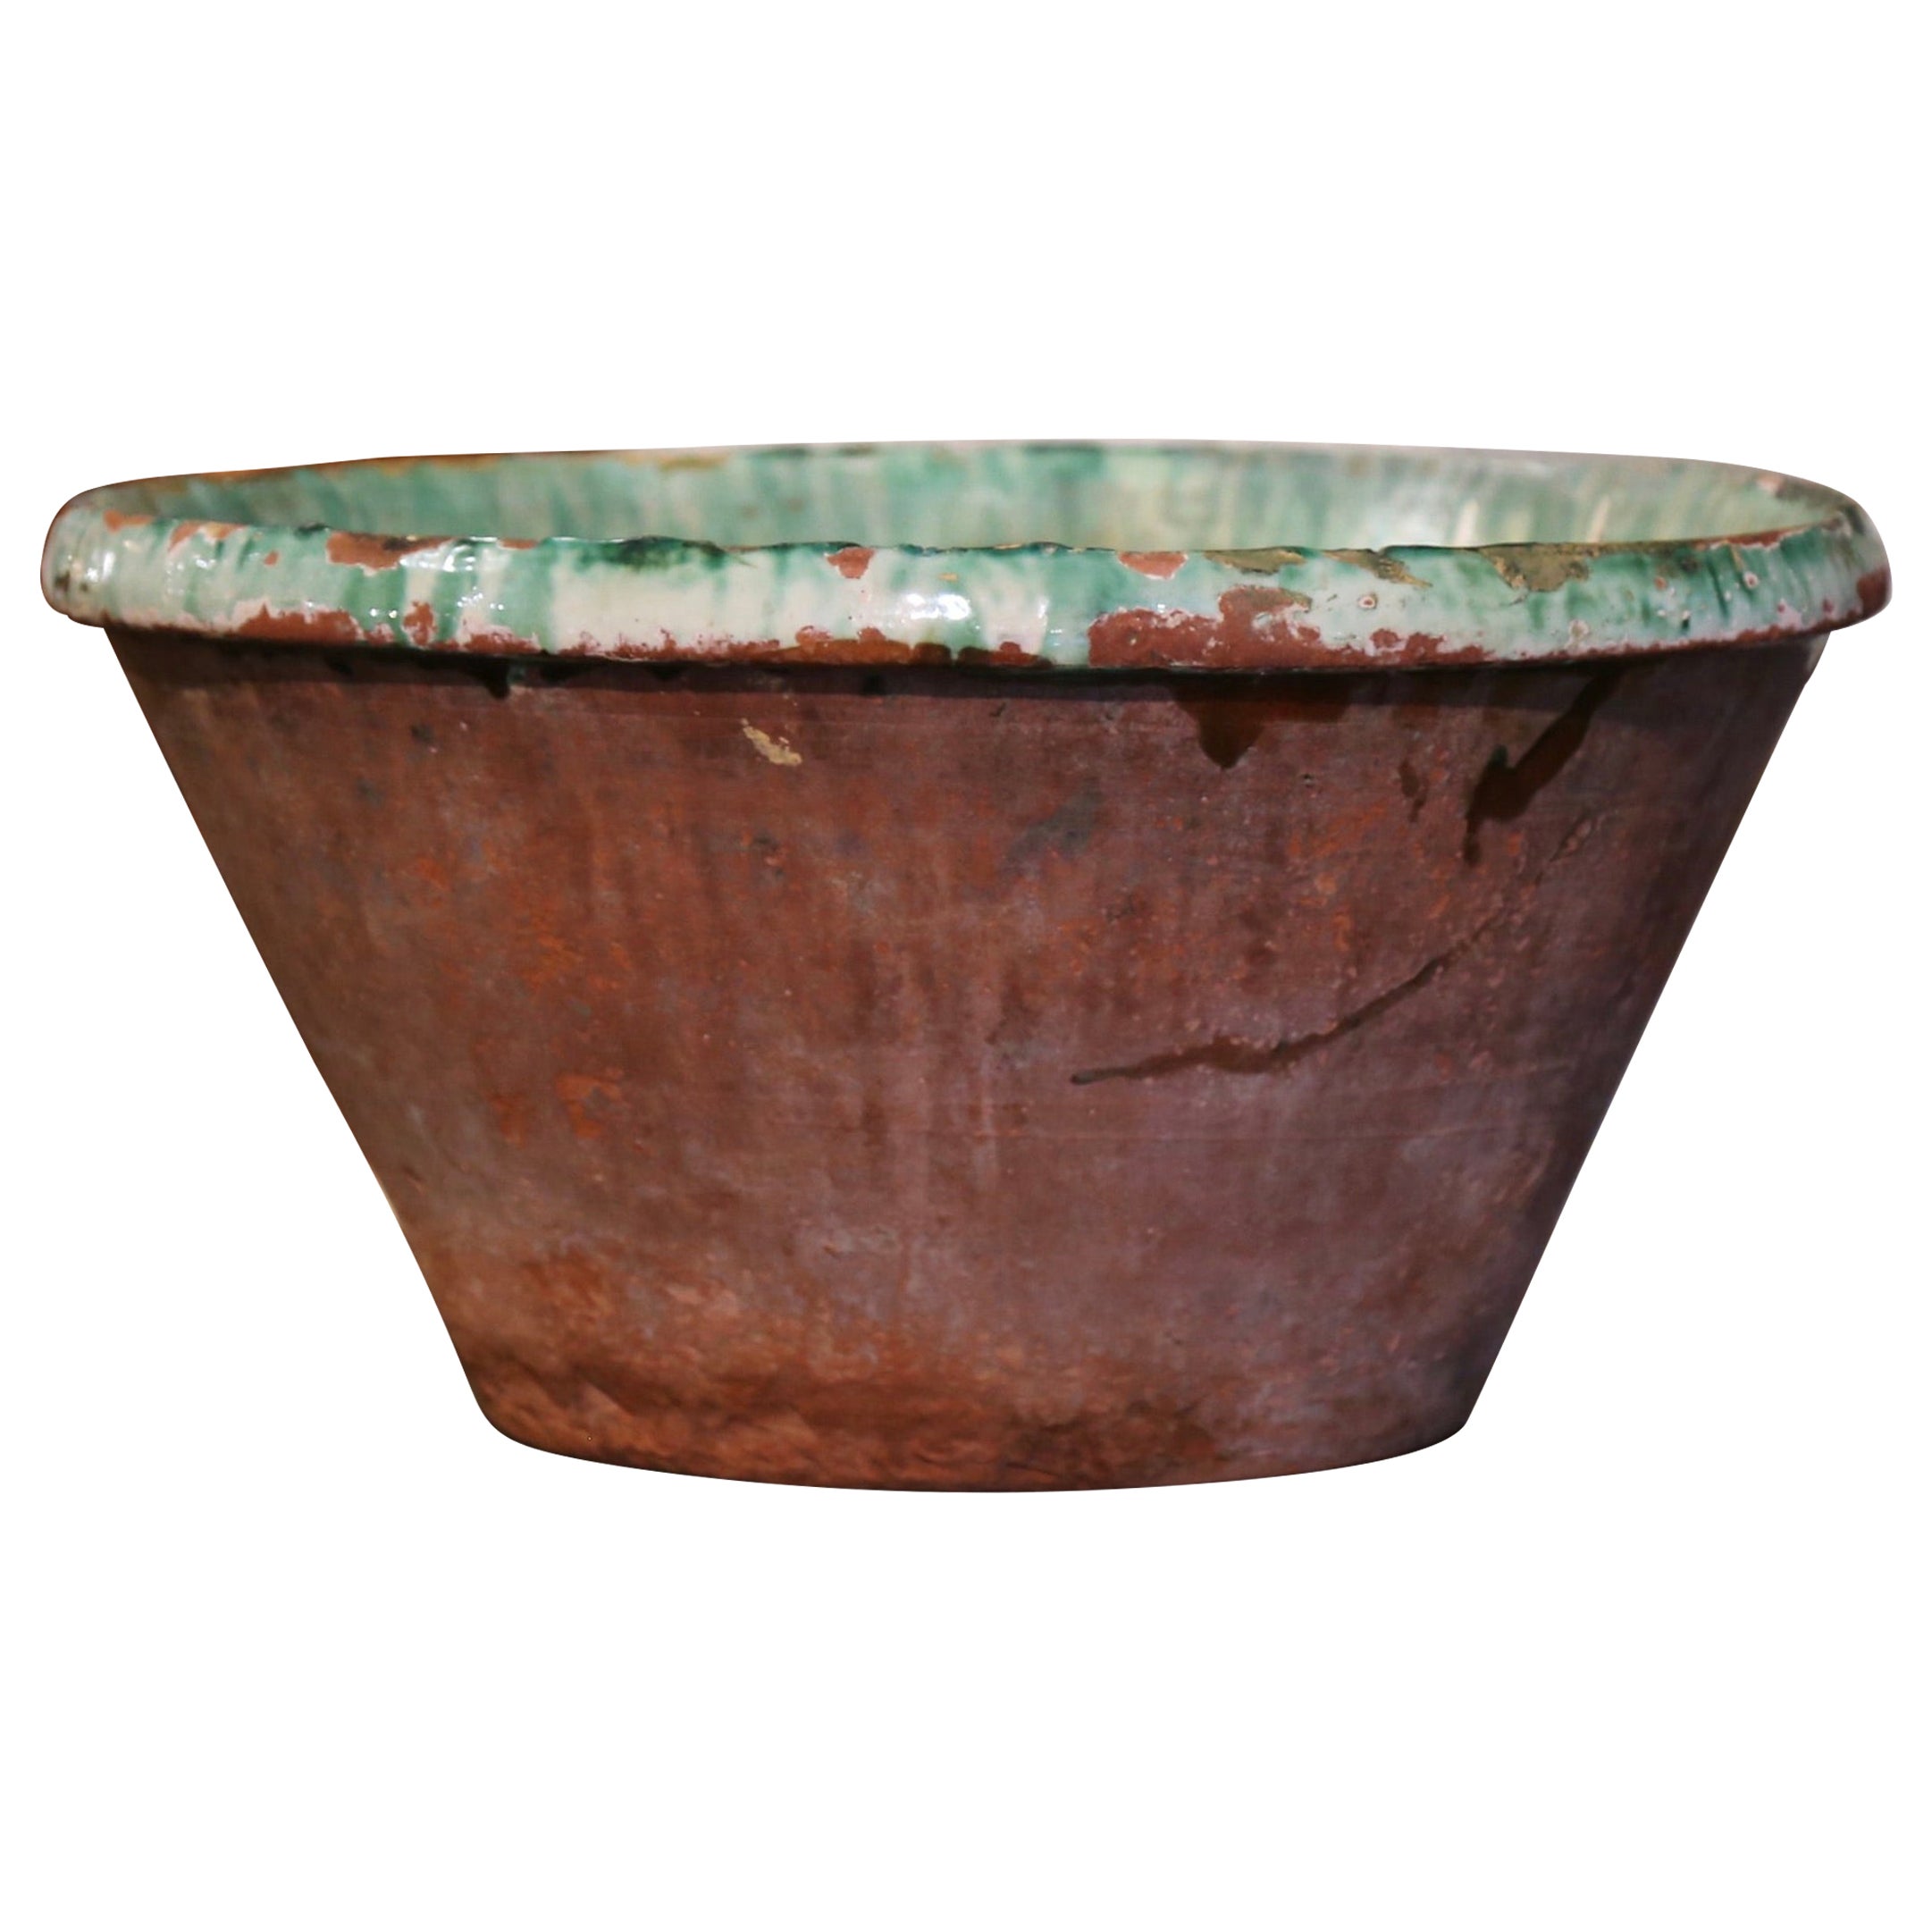 19th Century French Green Glazed Terracotta Decorative Bowl from Provence For Sale